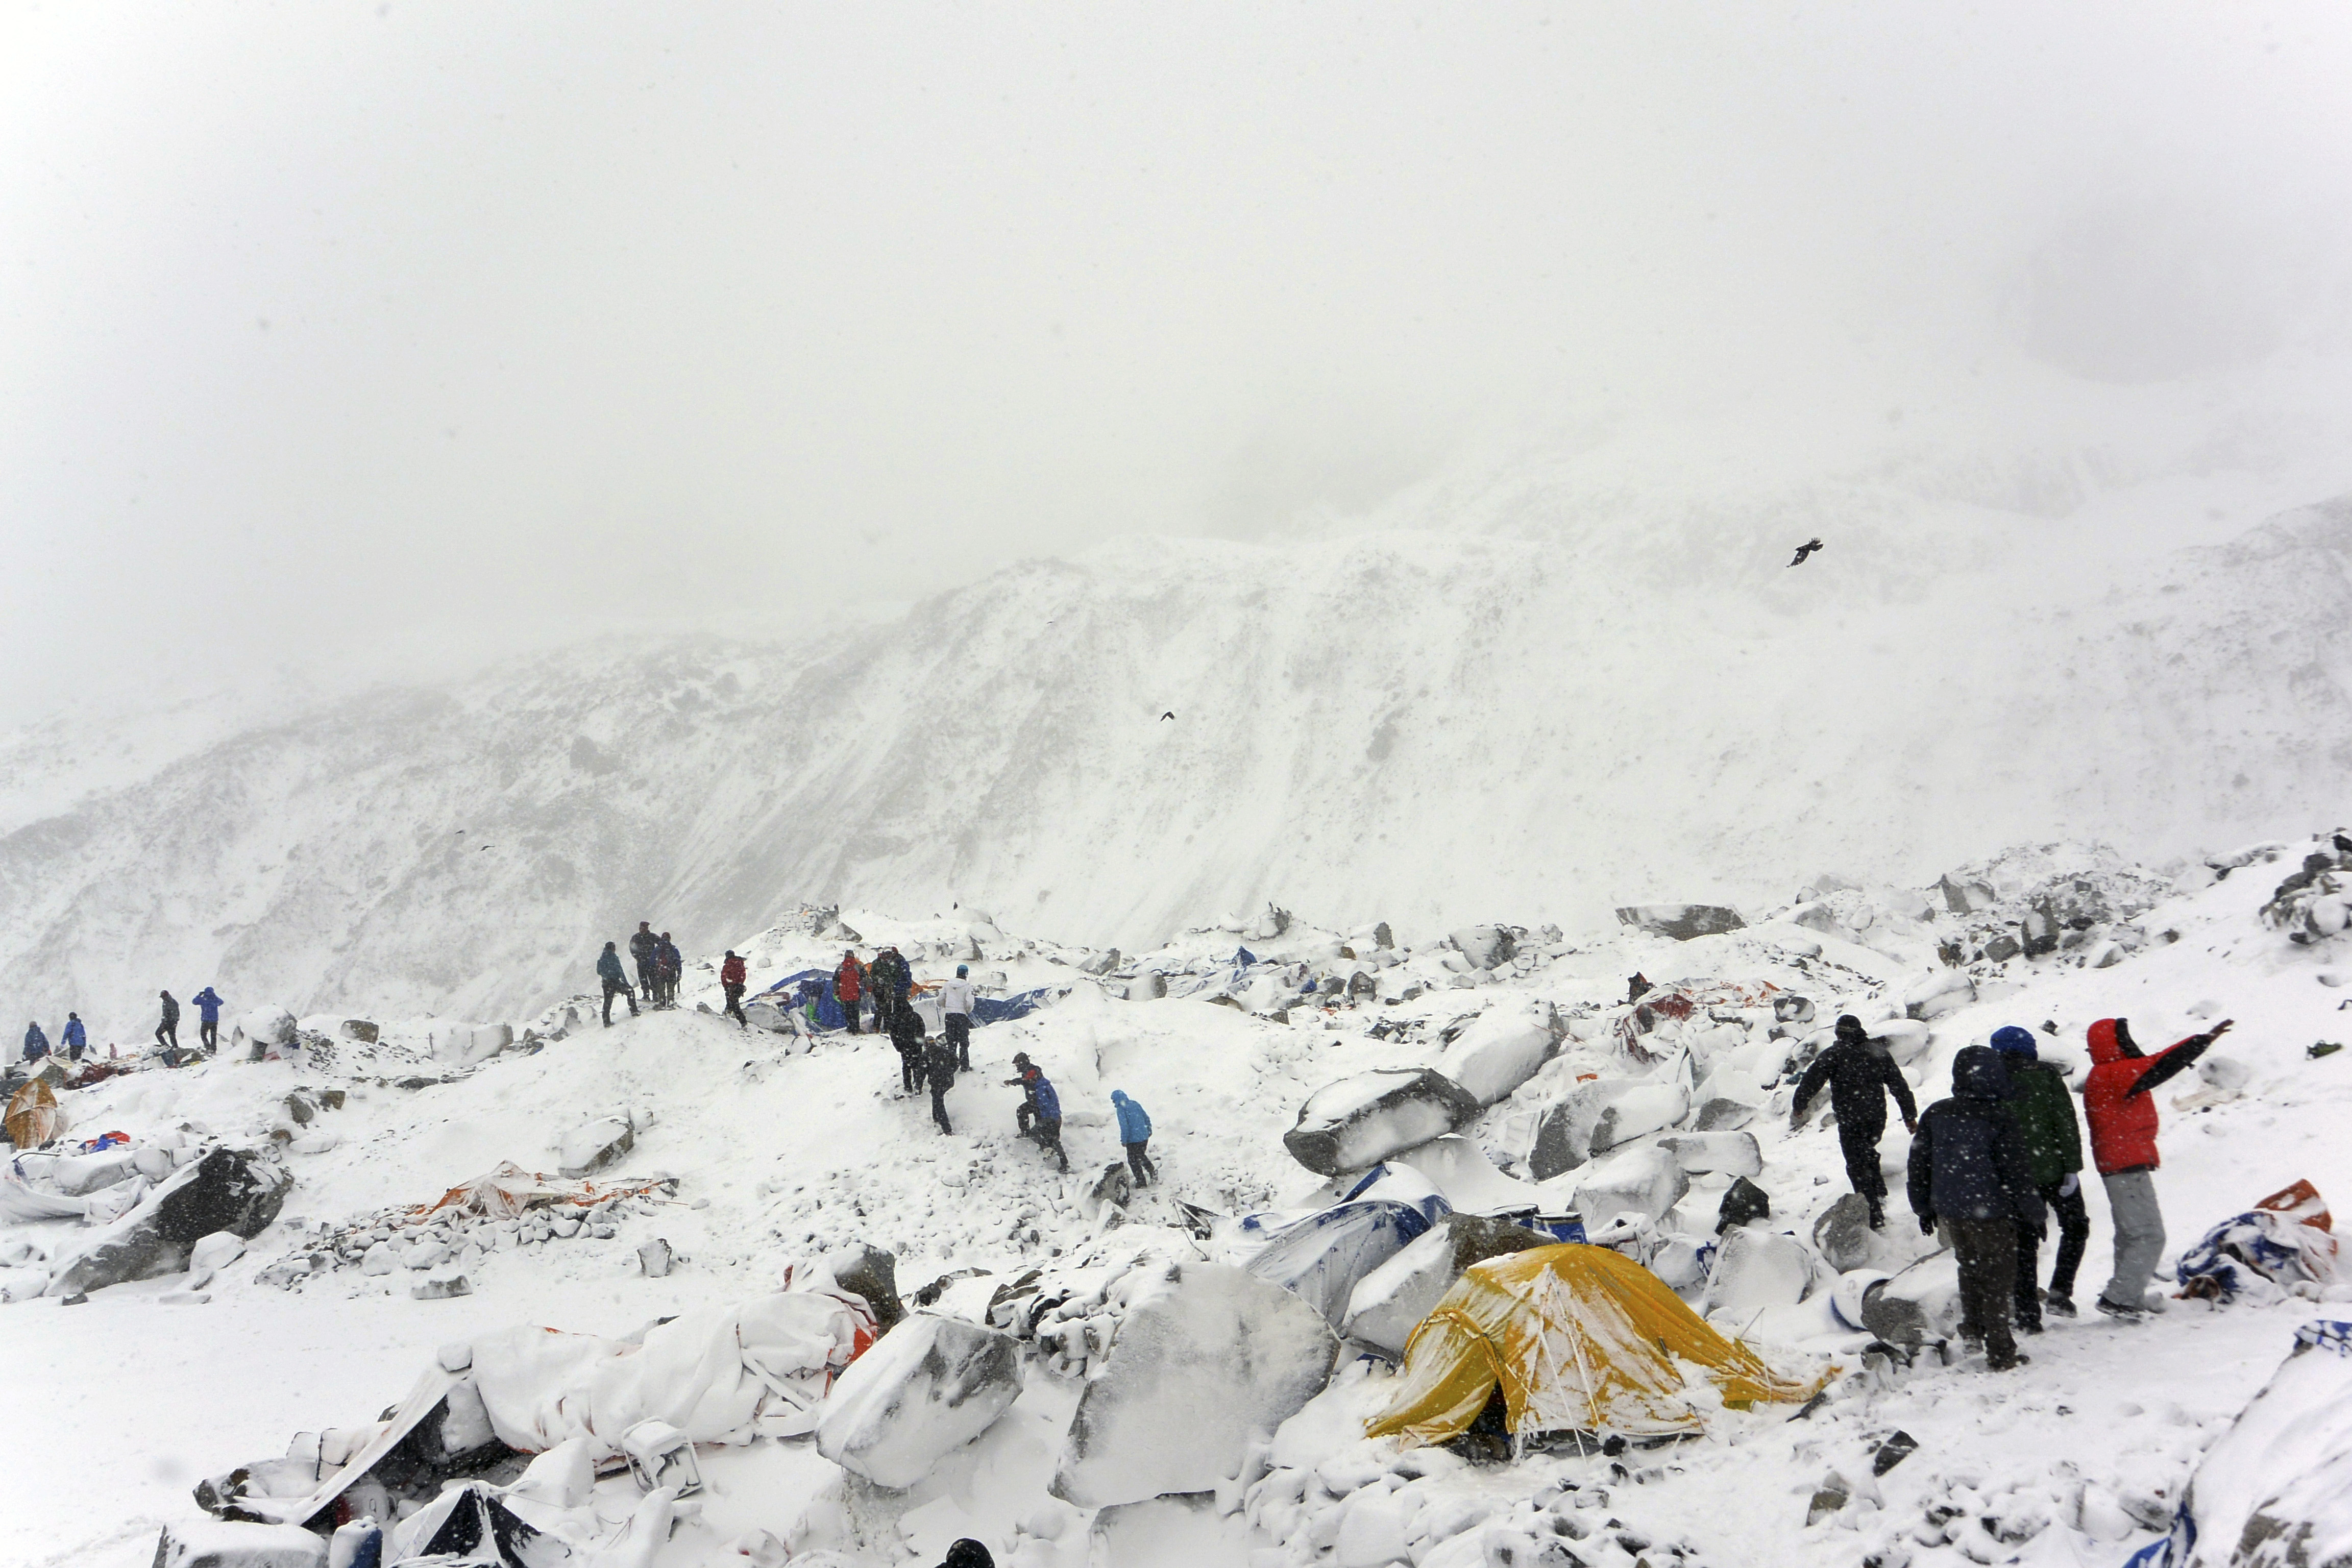 In this April 25, 2015 photo, climbers search through crushed tents for fellow climbers caught in an avalanche at a base camp on the Nepal side of Mount Everest. (Mariusz Malkowski—AP)